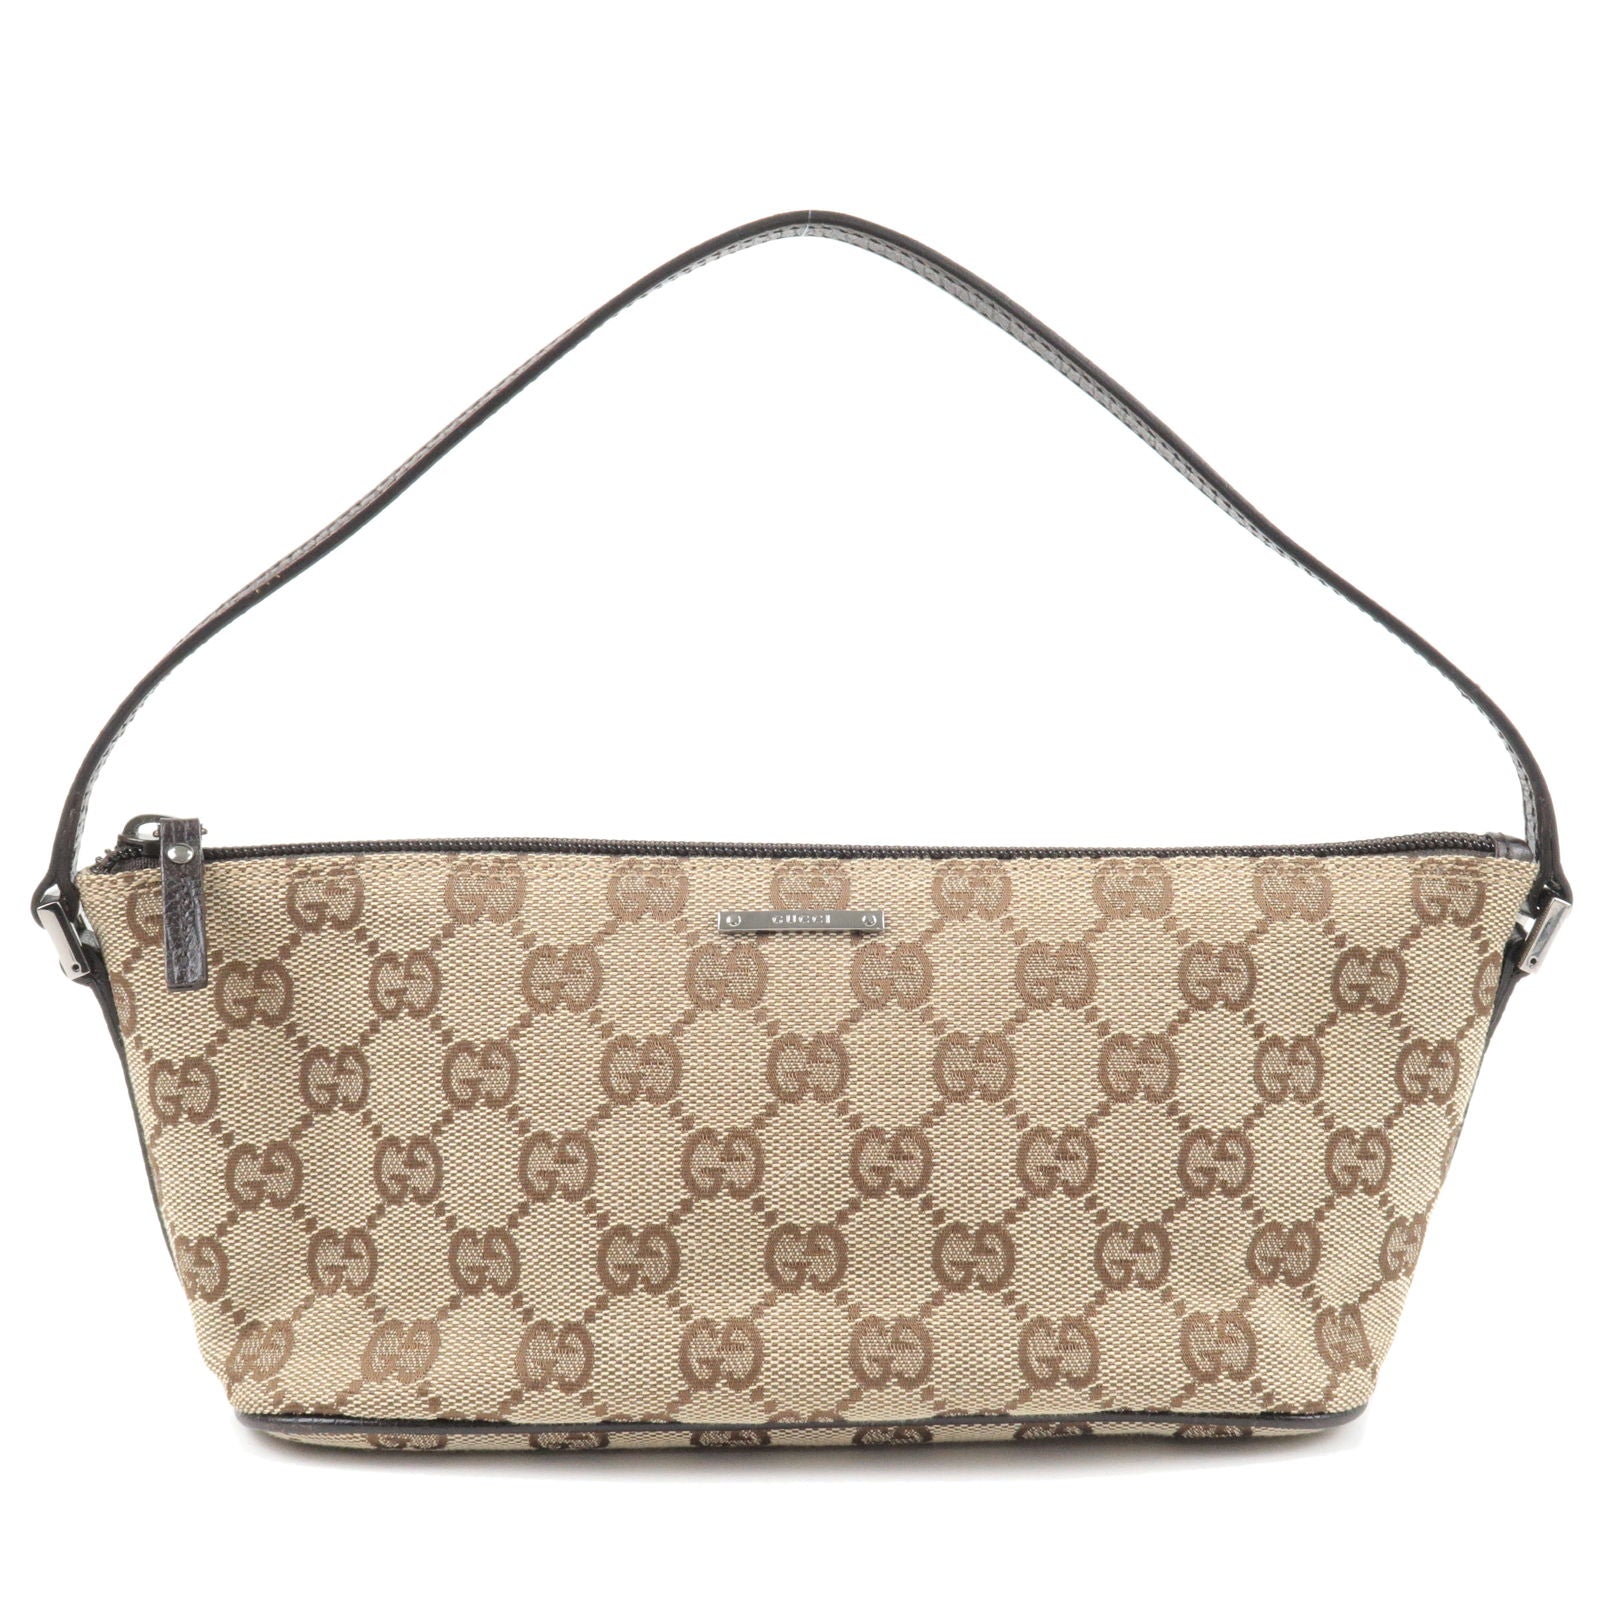 GUCCI-GG-Canvas-Leather-Boat-Bag-Hand-Bag-Beige-Brown-07198 – dct